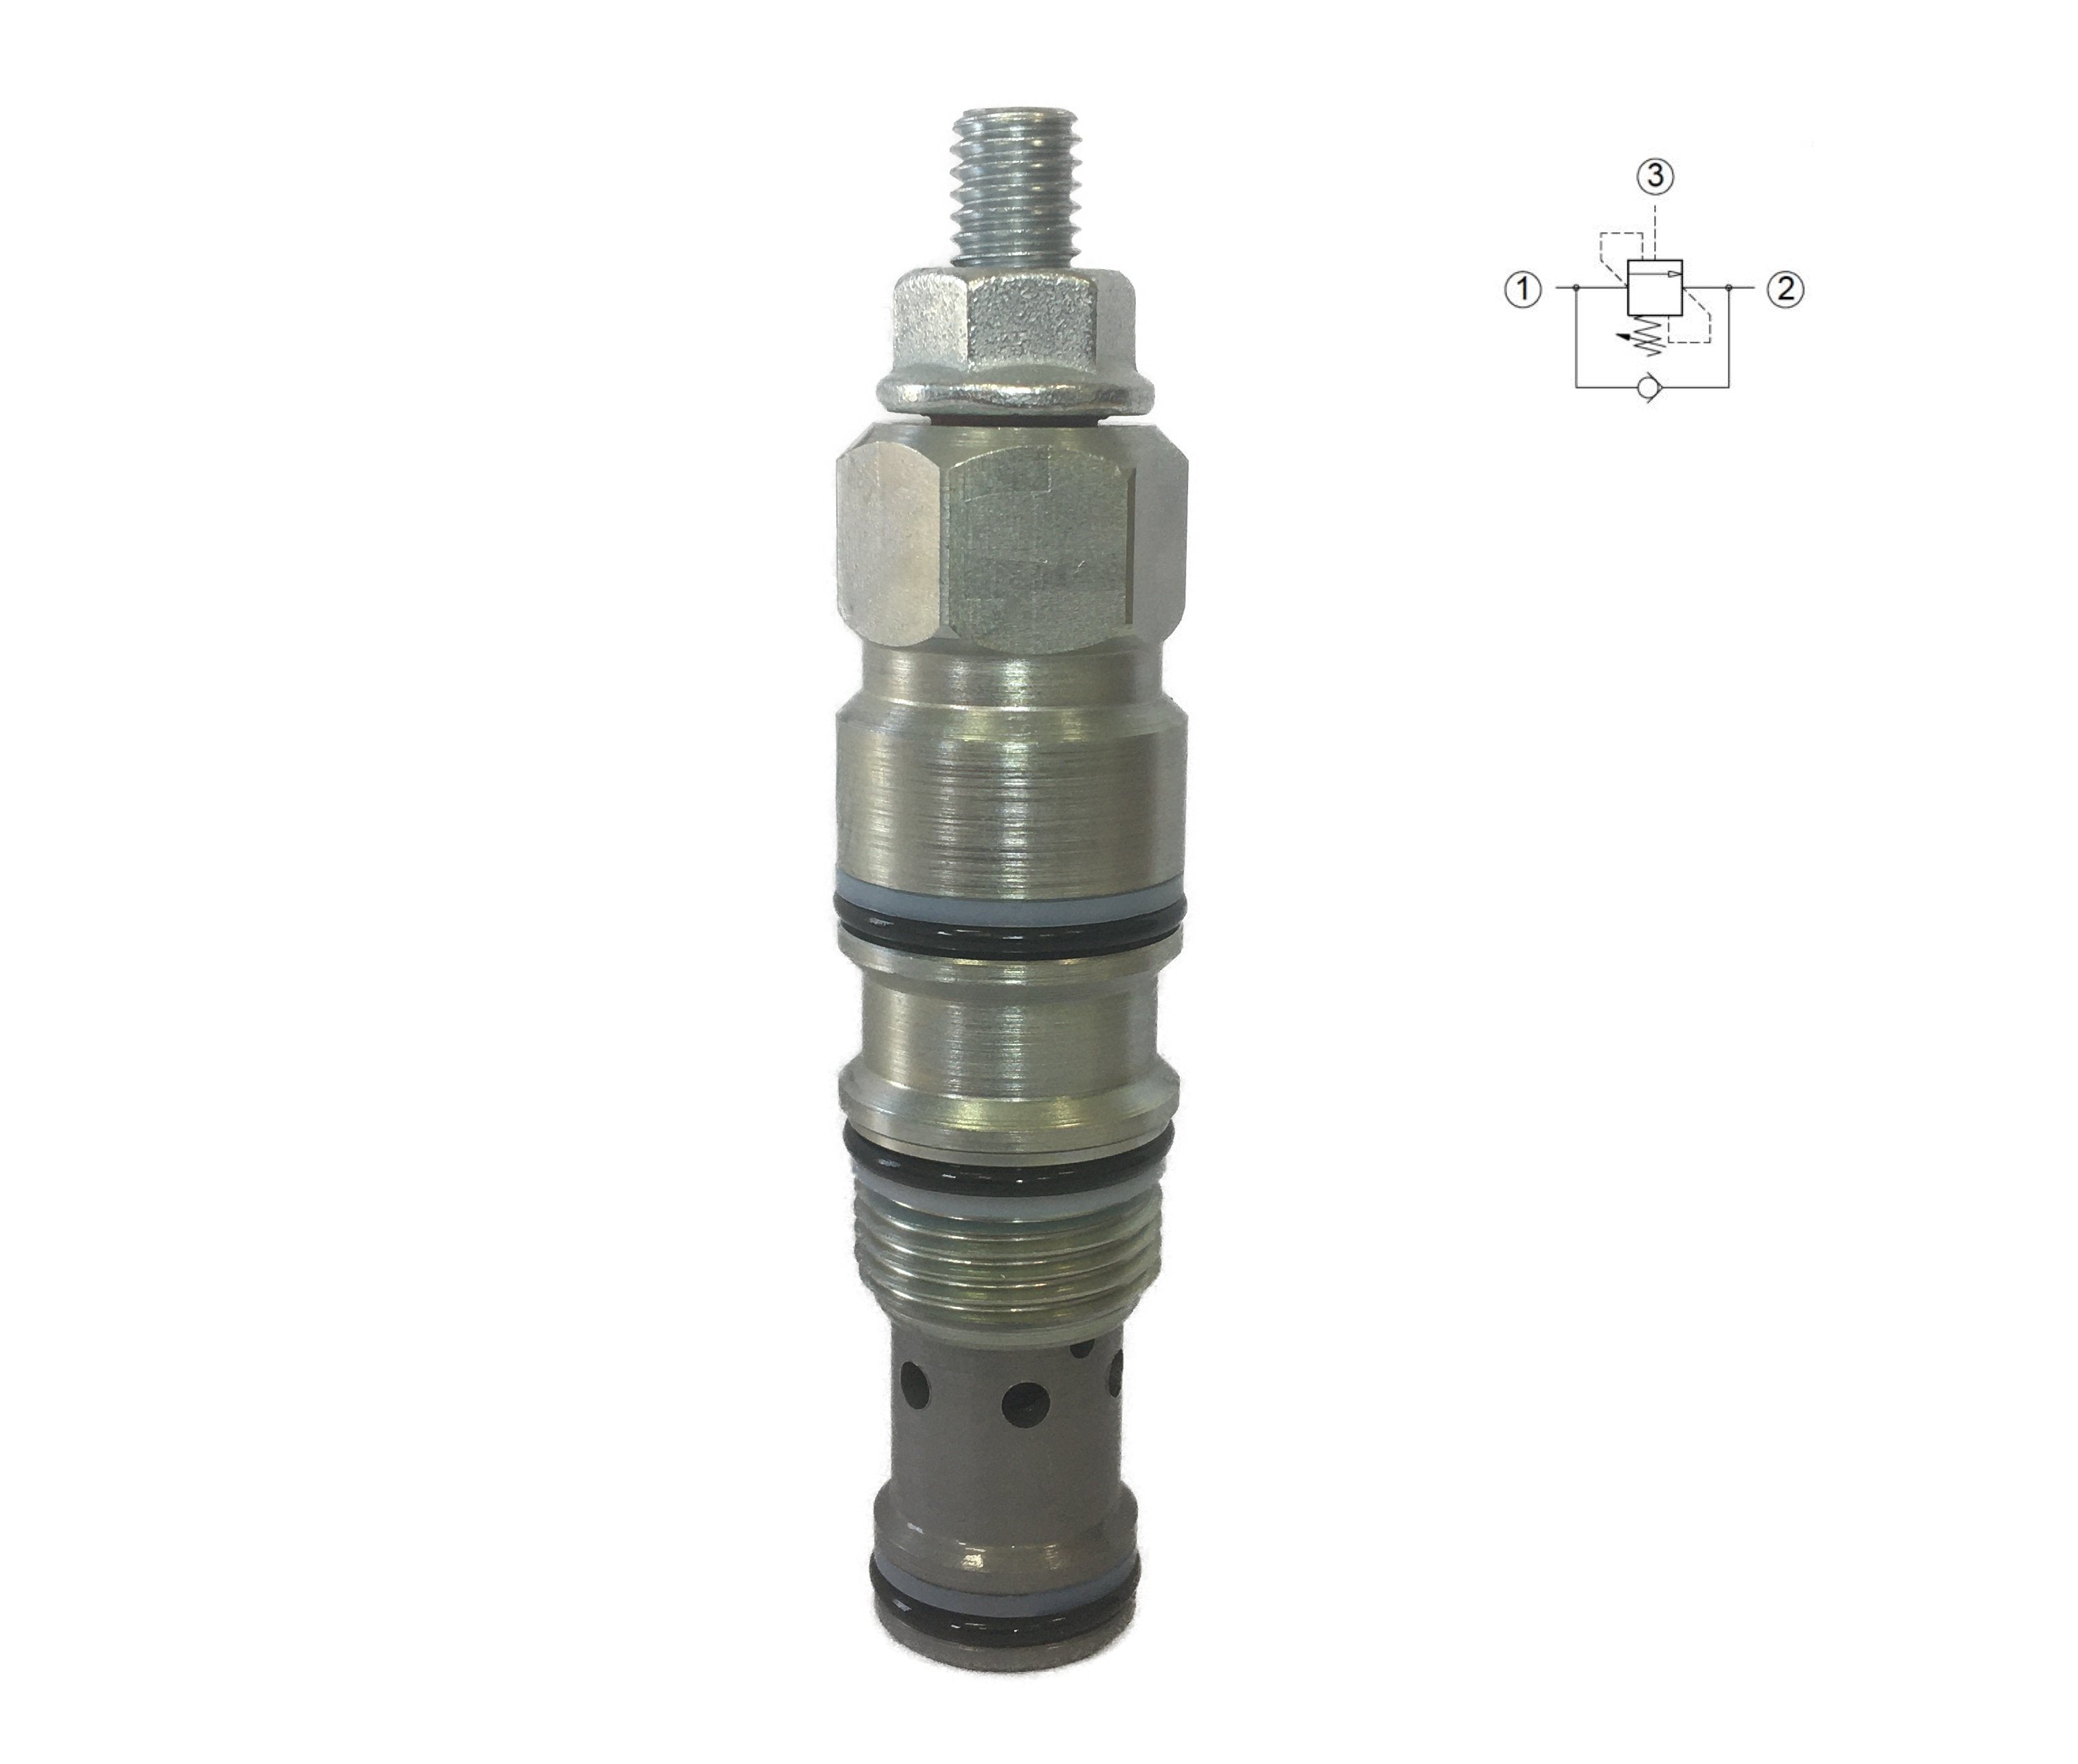 C000T100031100A : Valvole Counterbalance, 3:1, 16 GPM, 5000psi, 507 to 1522psi adjustable, 1450psi Preset, T-11A